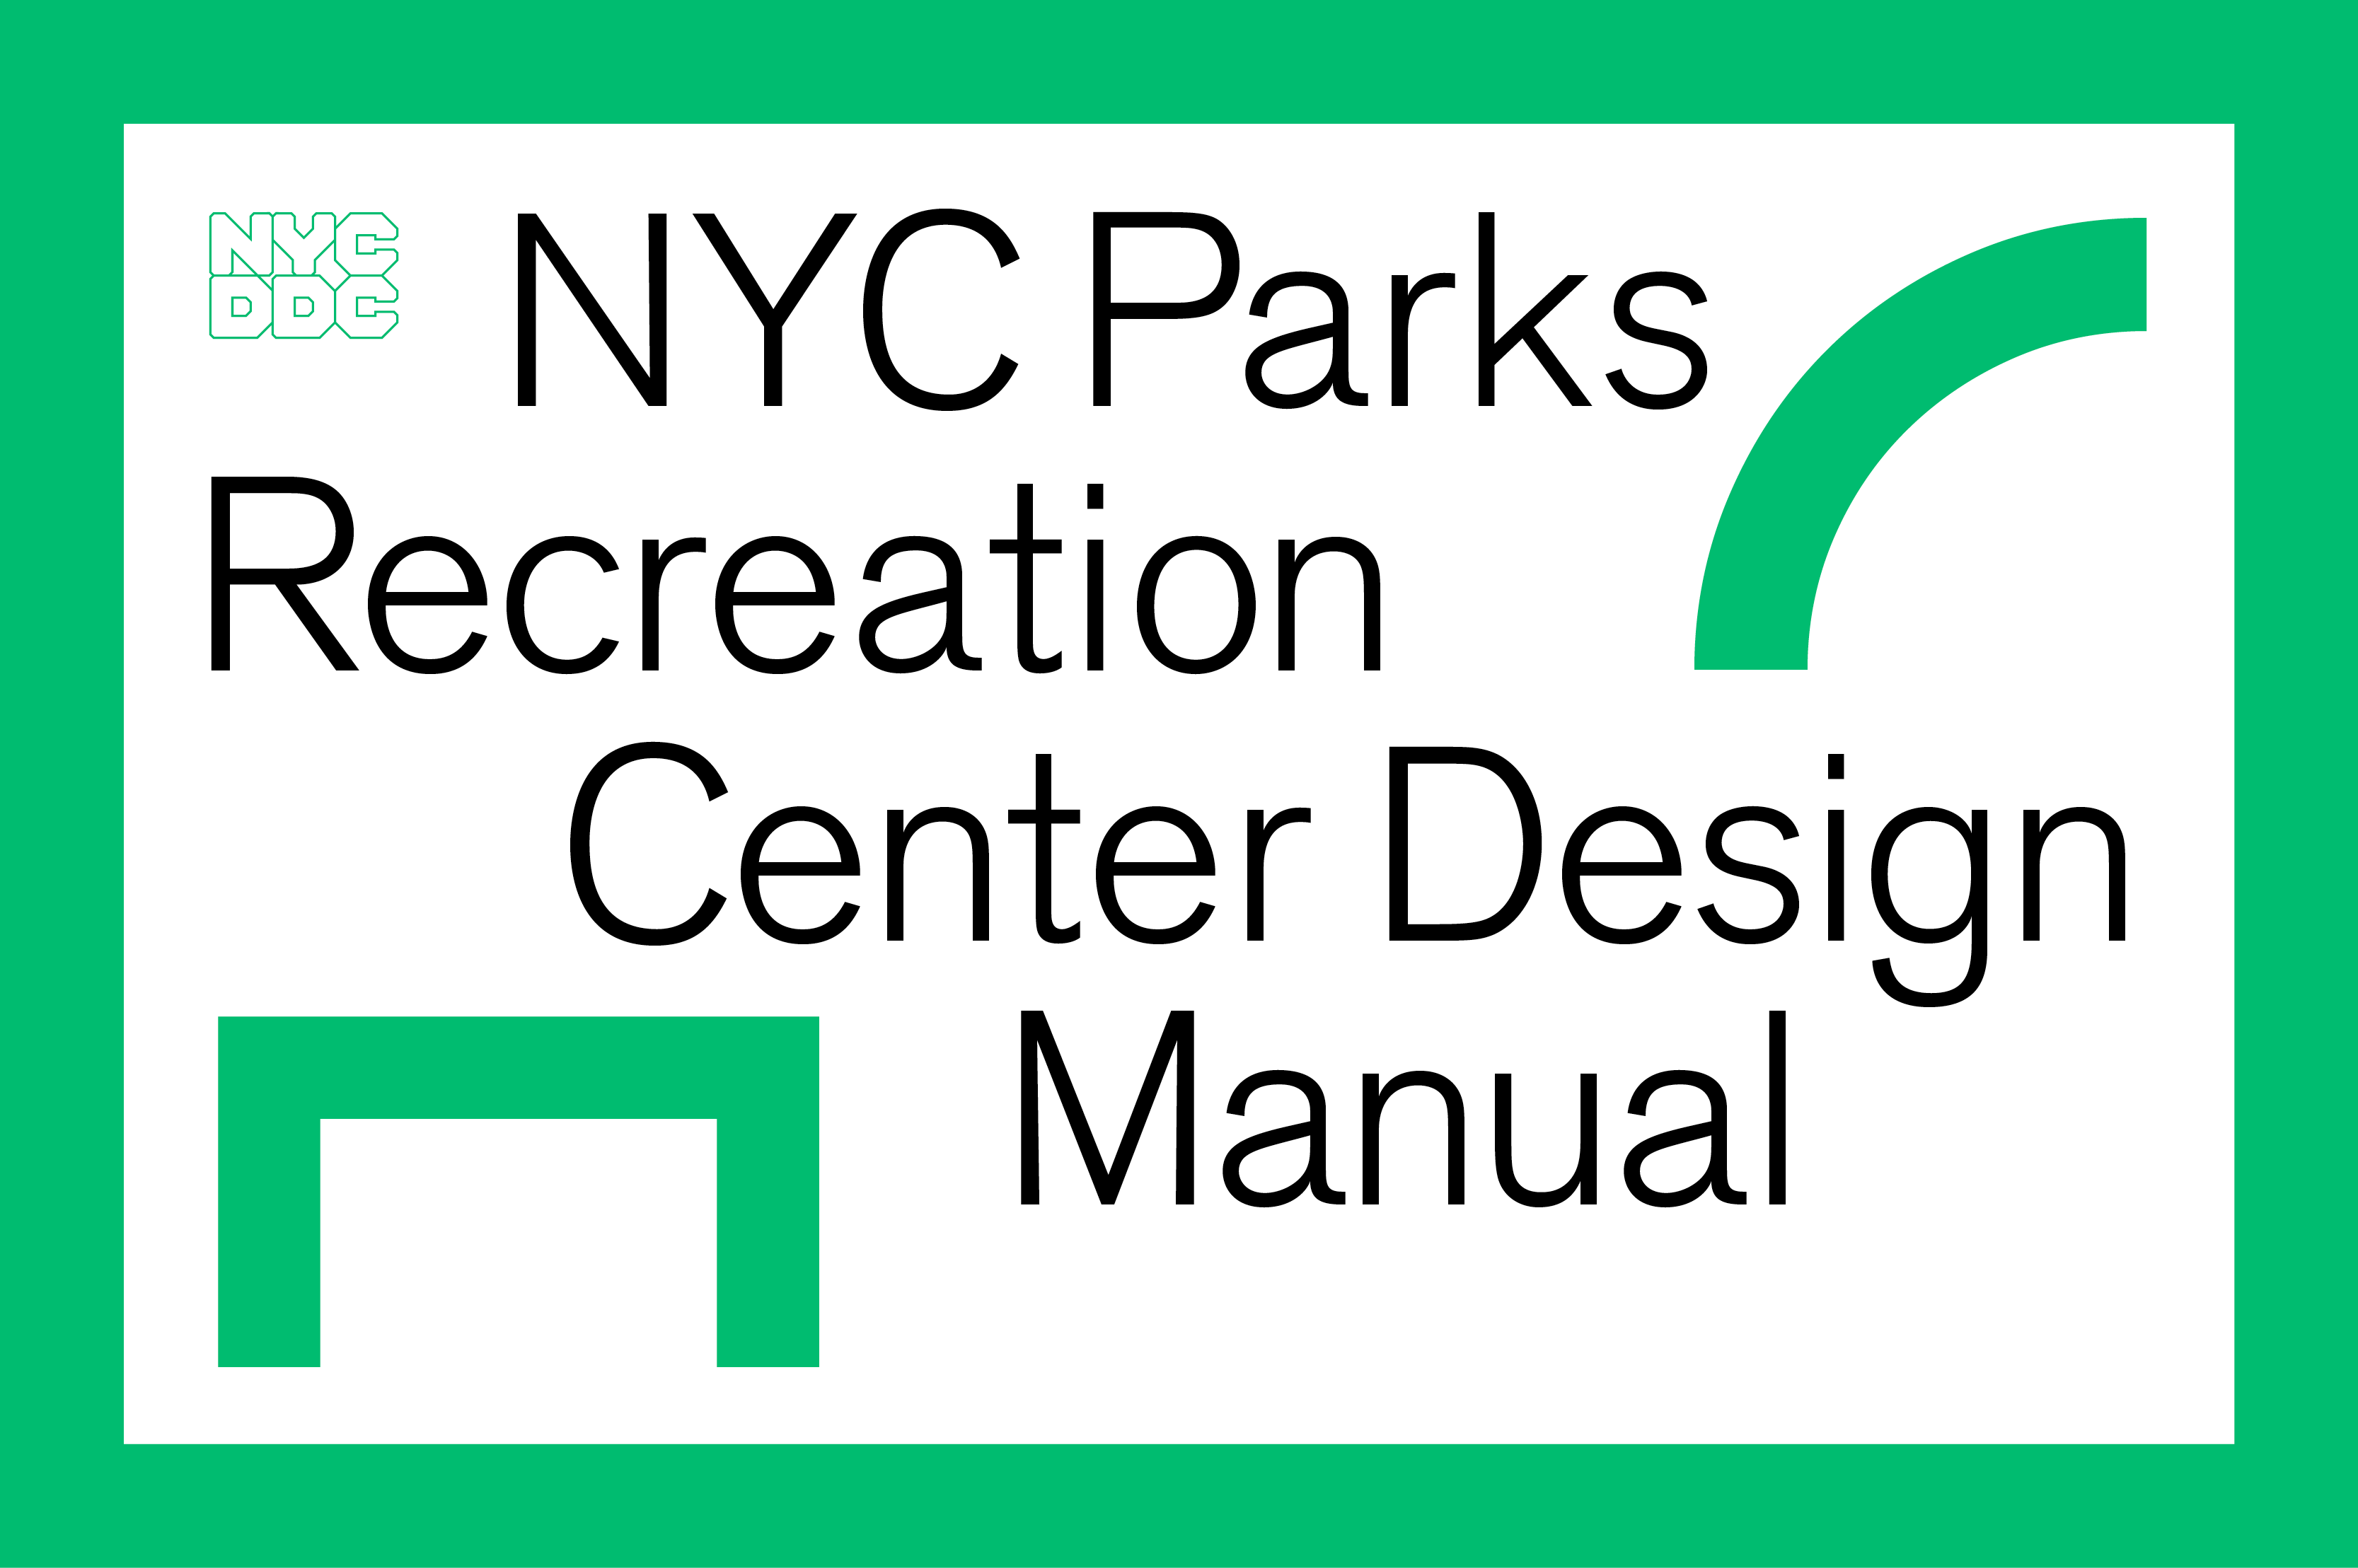 Cover of NYC Parks Recreation Center Design Manual